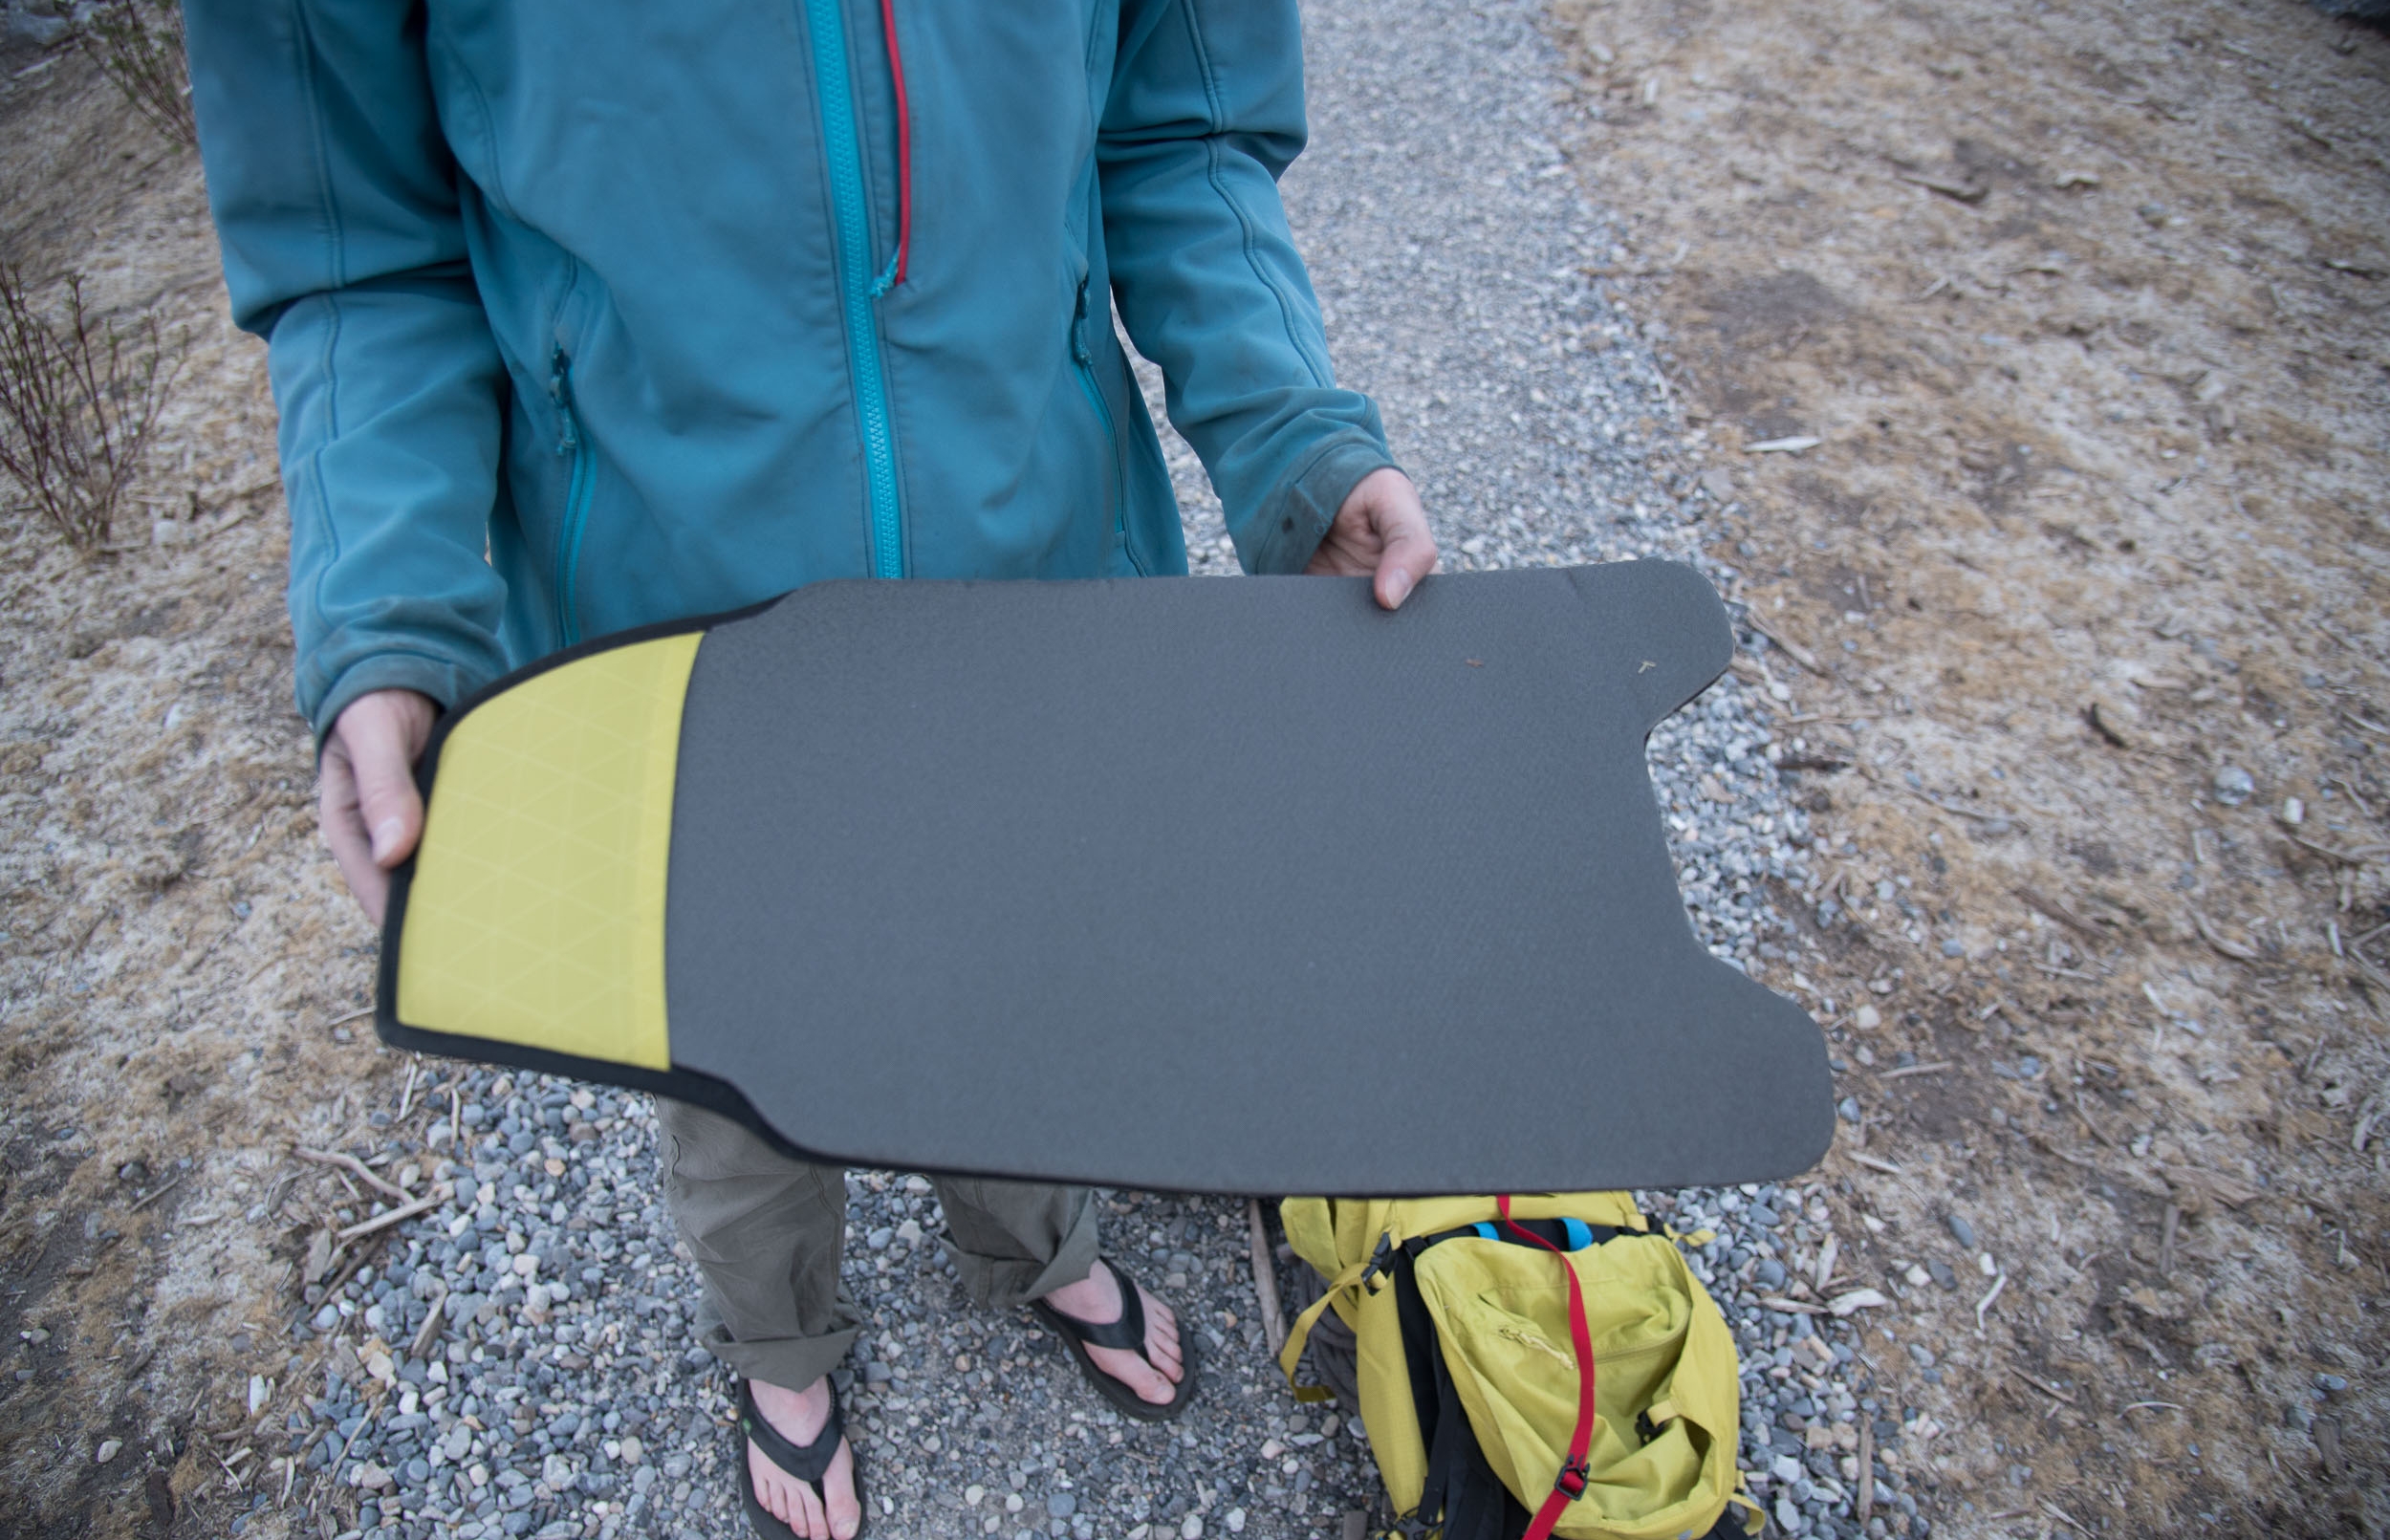 removable back panel - the removable back panel now features padding which apparently makes it a bivy pad